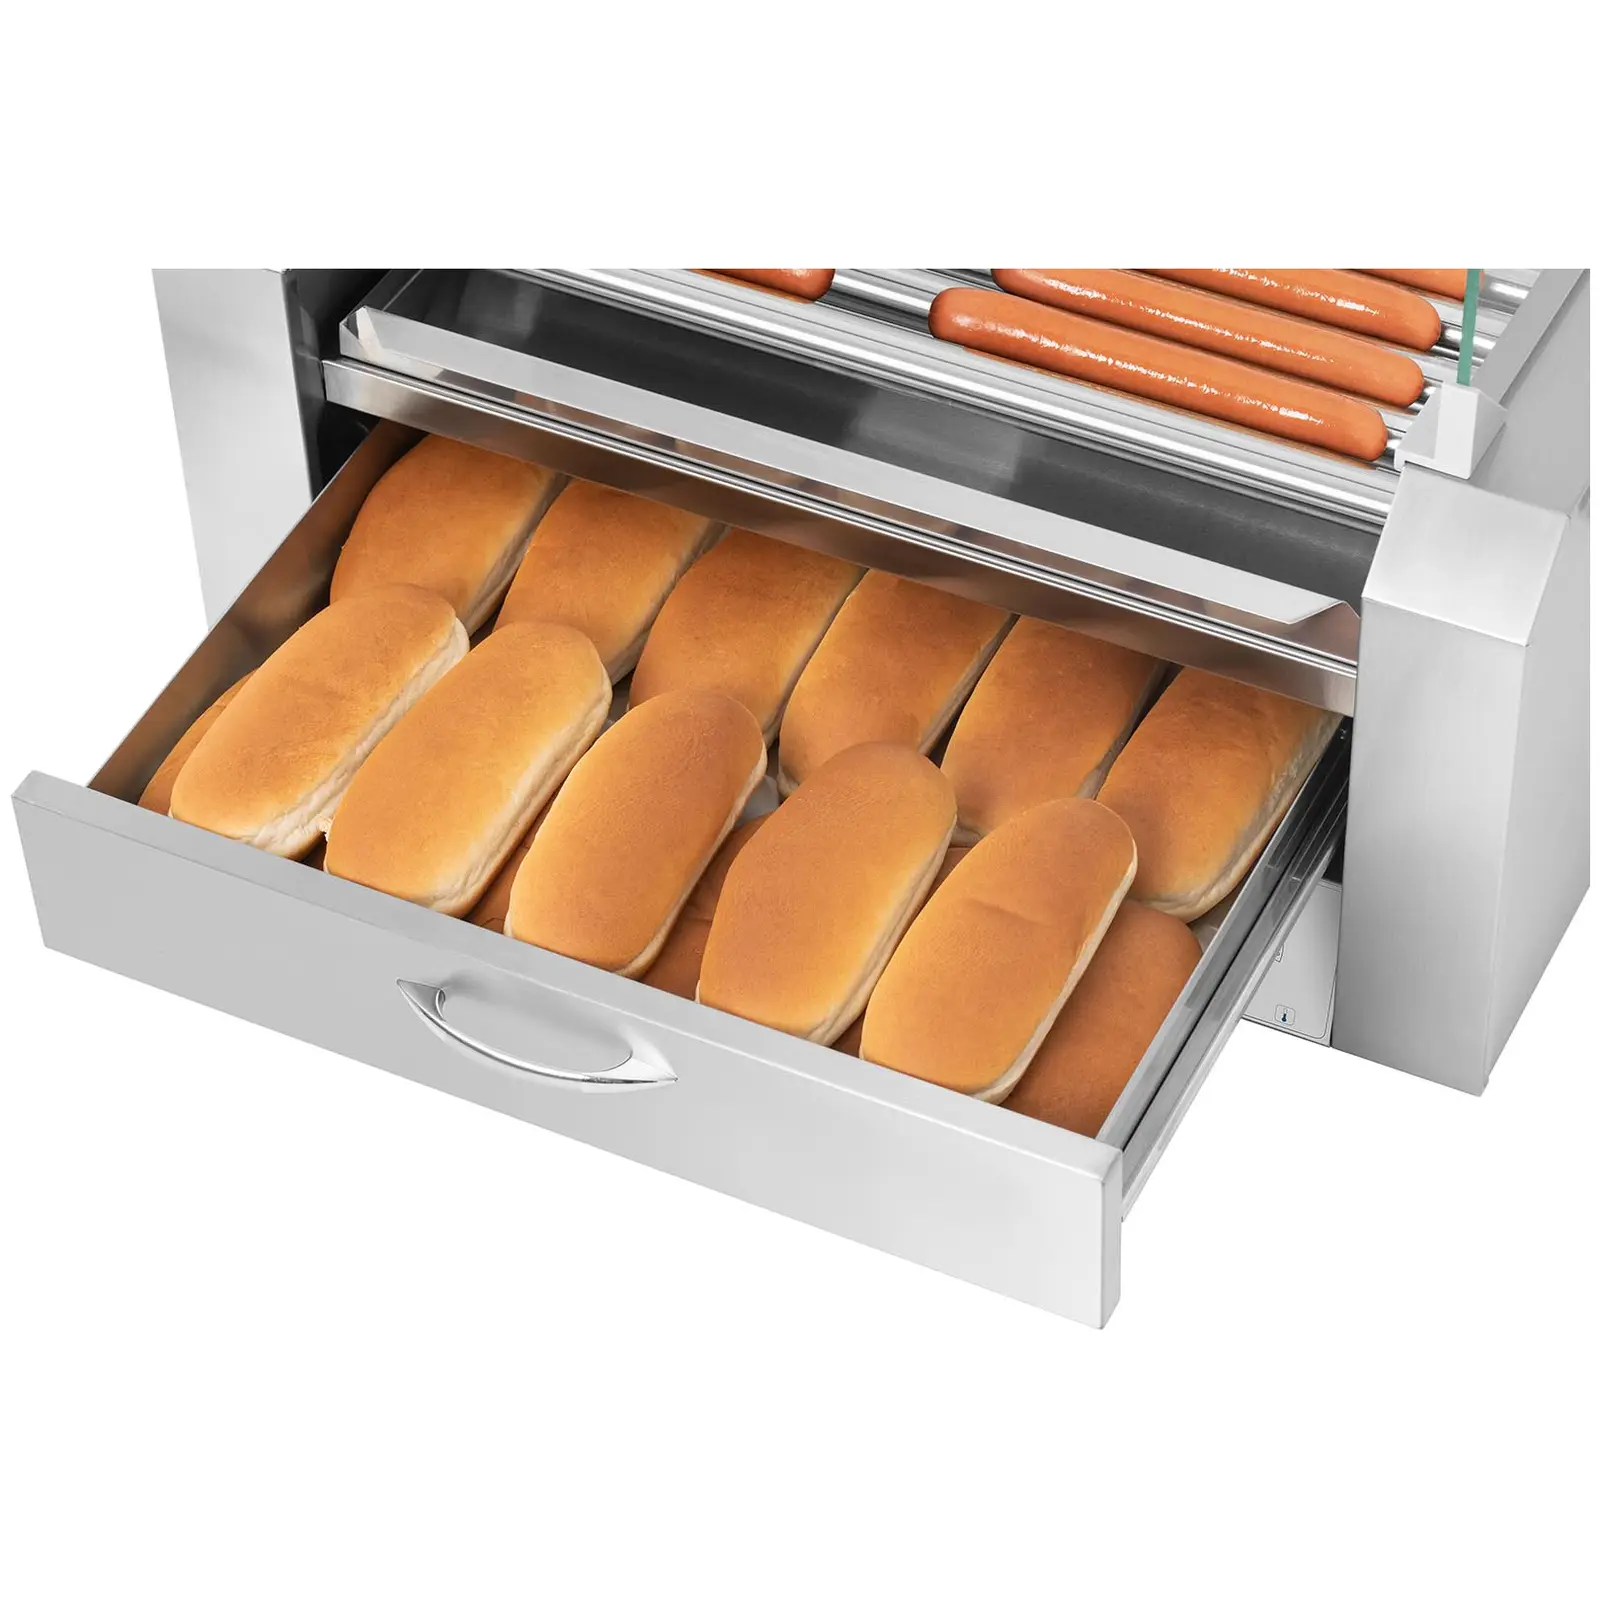 Hotdog Grill - 9 rollers - Warming drawers - Stainless steel